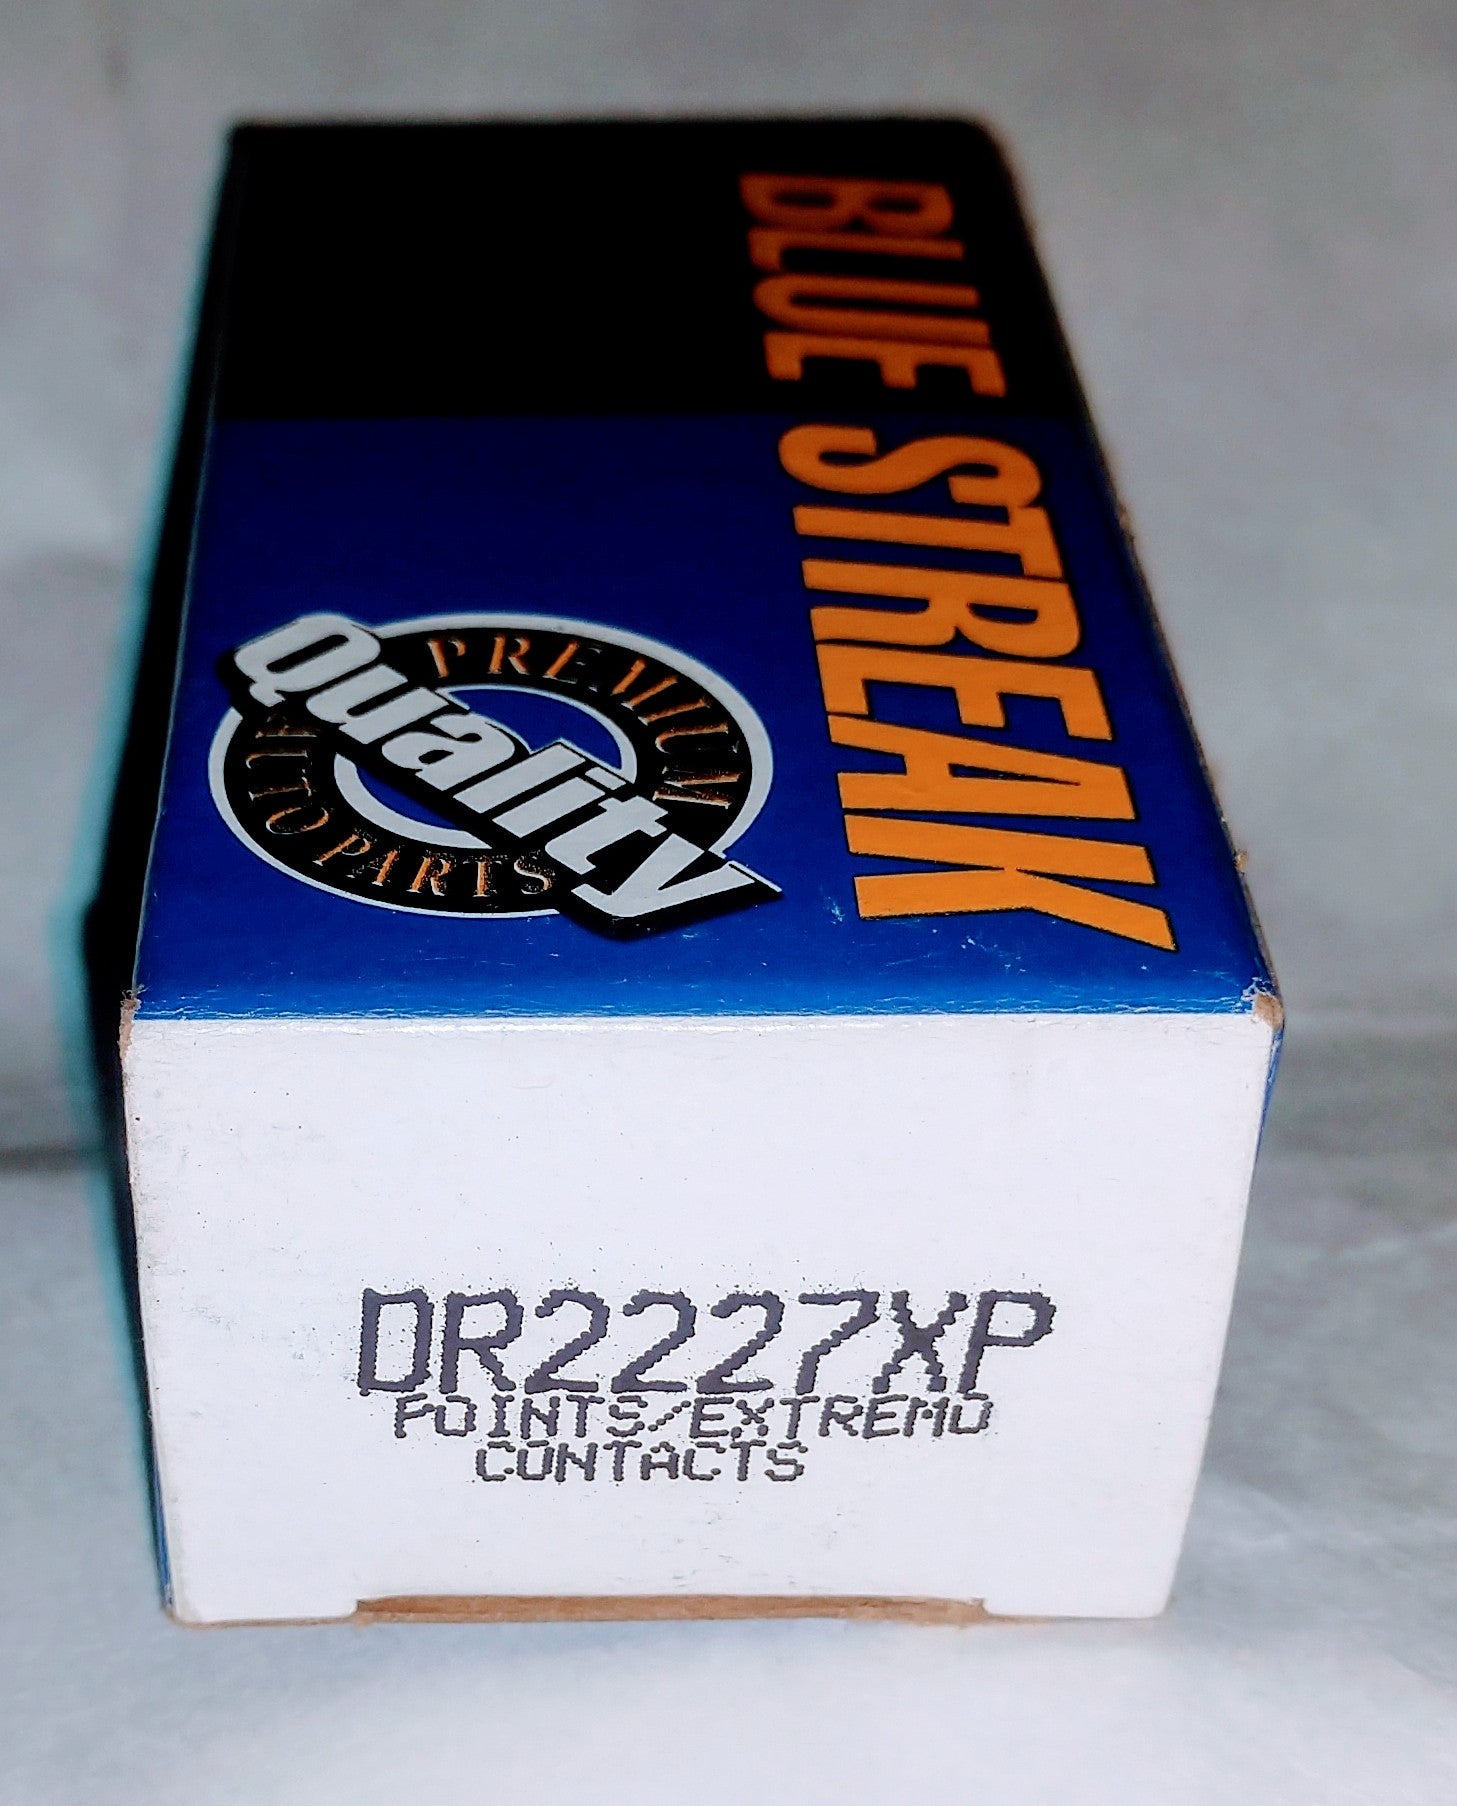 DR2227XP POINTS/EXTREMO (CONTACTS)